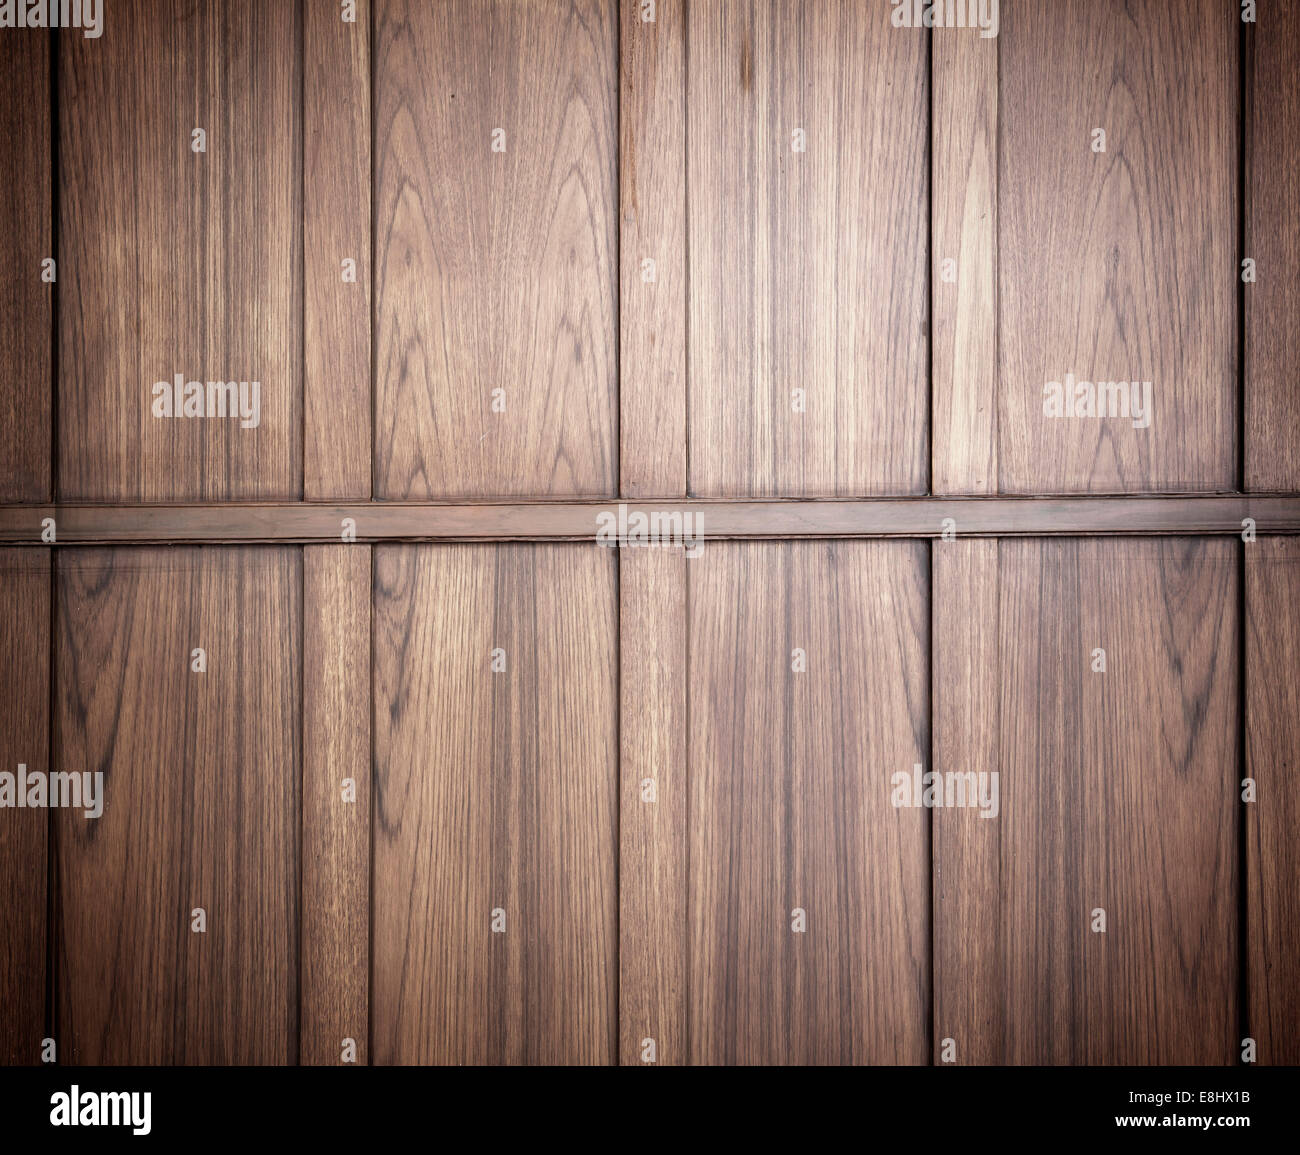 Teak wood wall background texture abstract patterns Stock Photo - Alamy